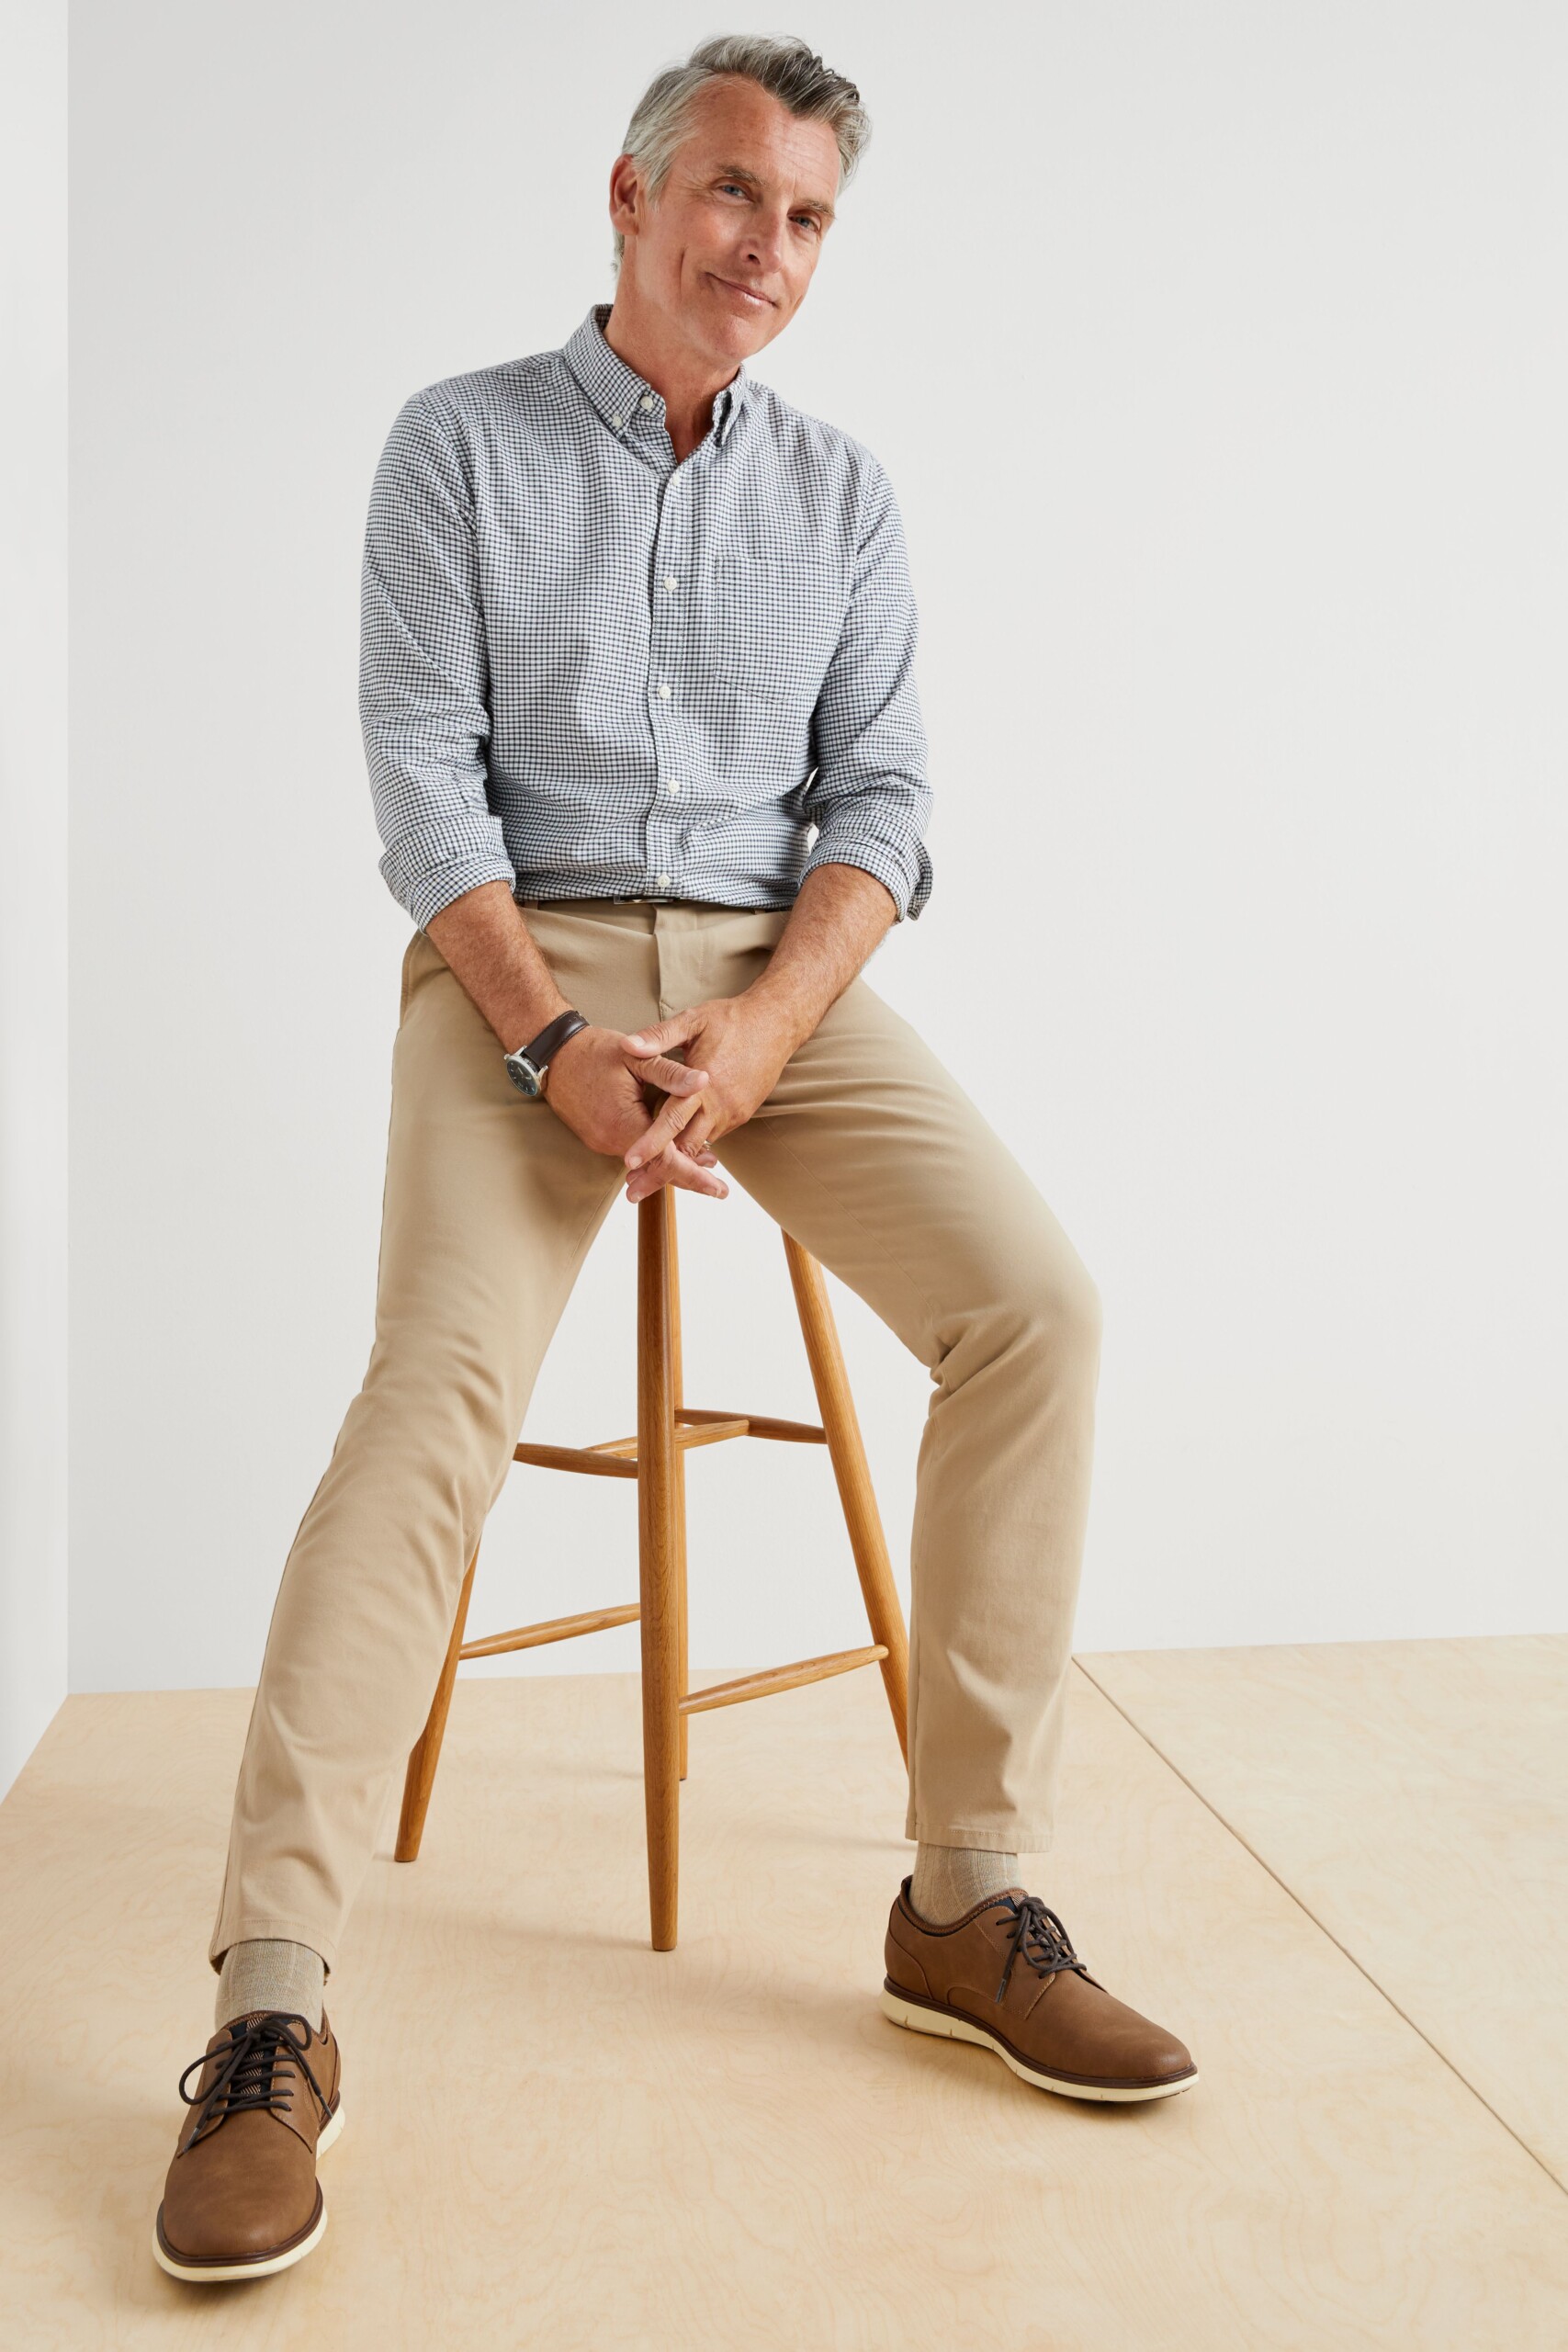 Bulk Learning valve Men's Business Casual | Style Guide | Stitch Fix